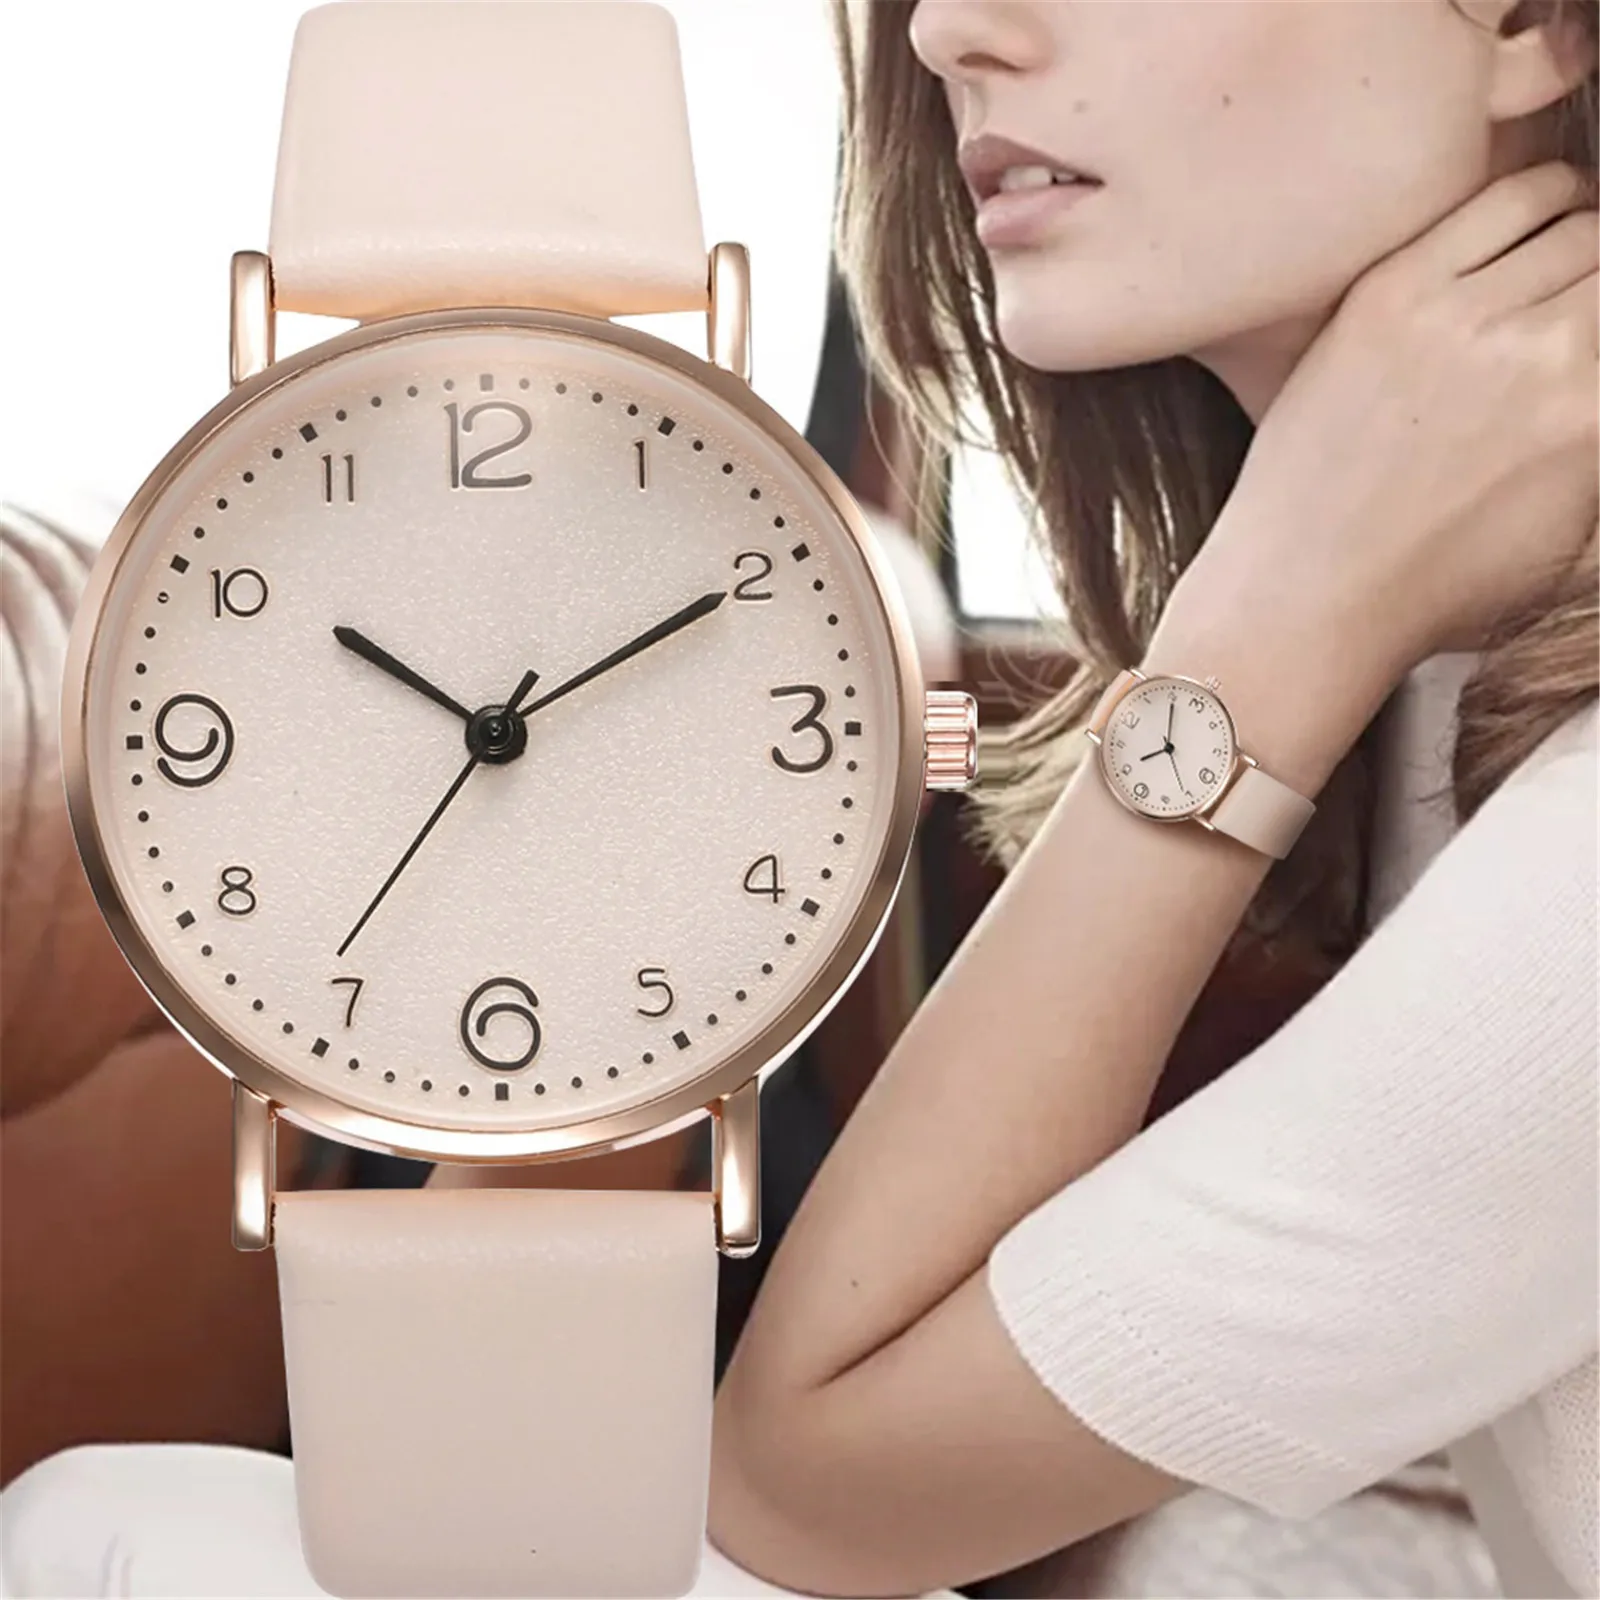 

Stylish And Simple Ladies Quartz Wristwatch Casual Women's Alloy Watches Clock Femme Leather Strap Watches Reloj Mujer Montre